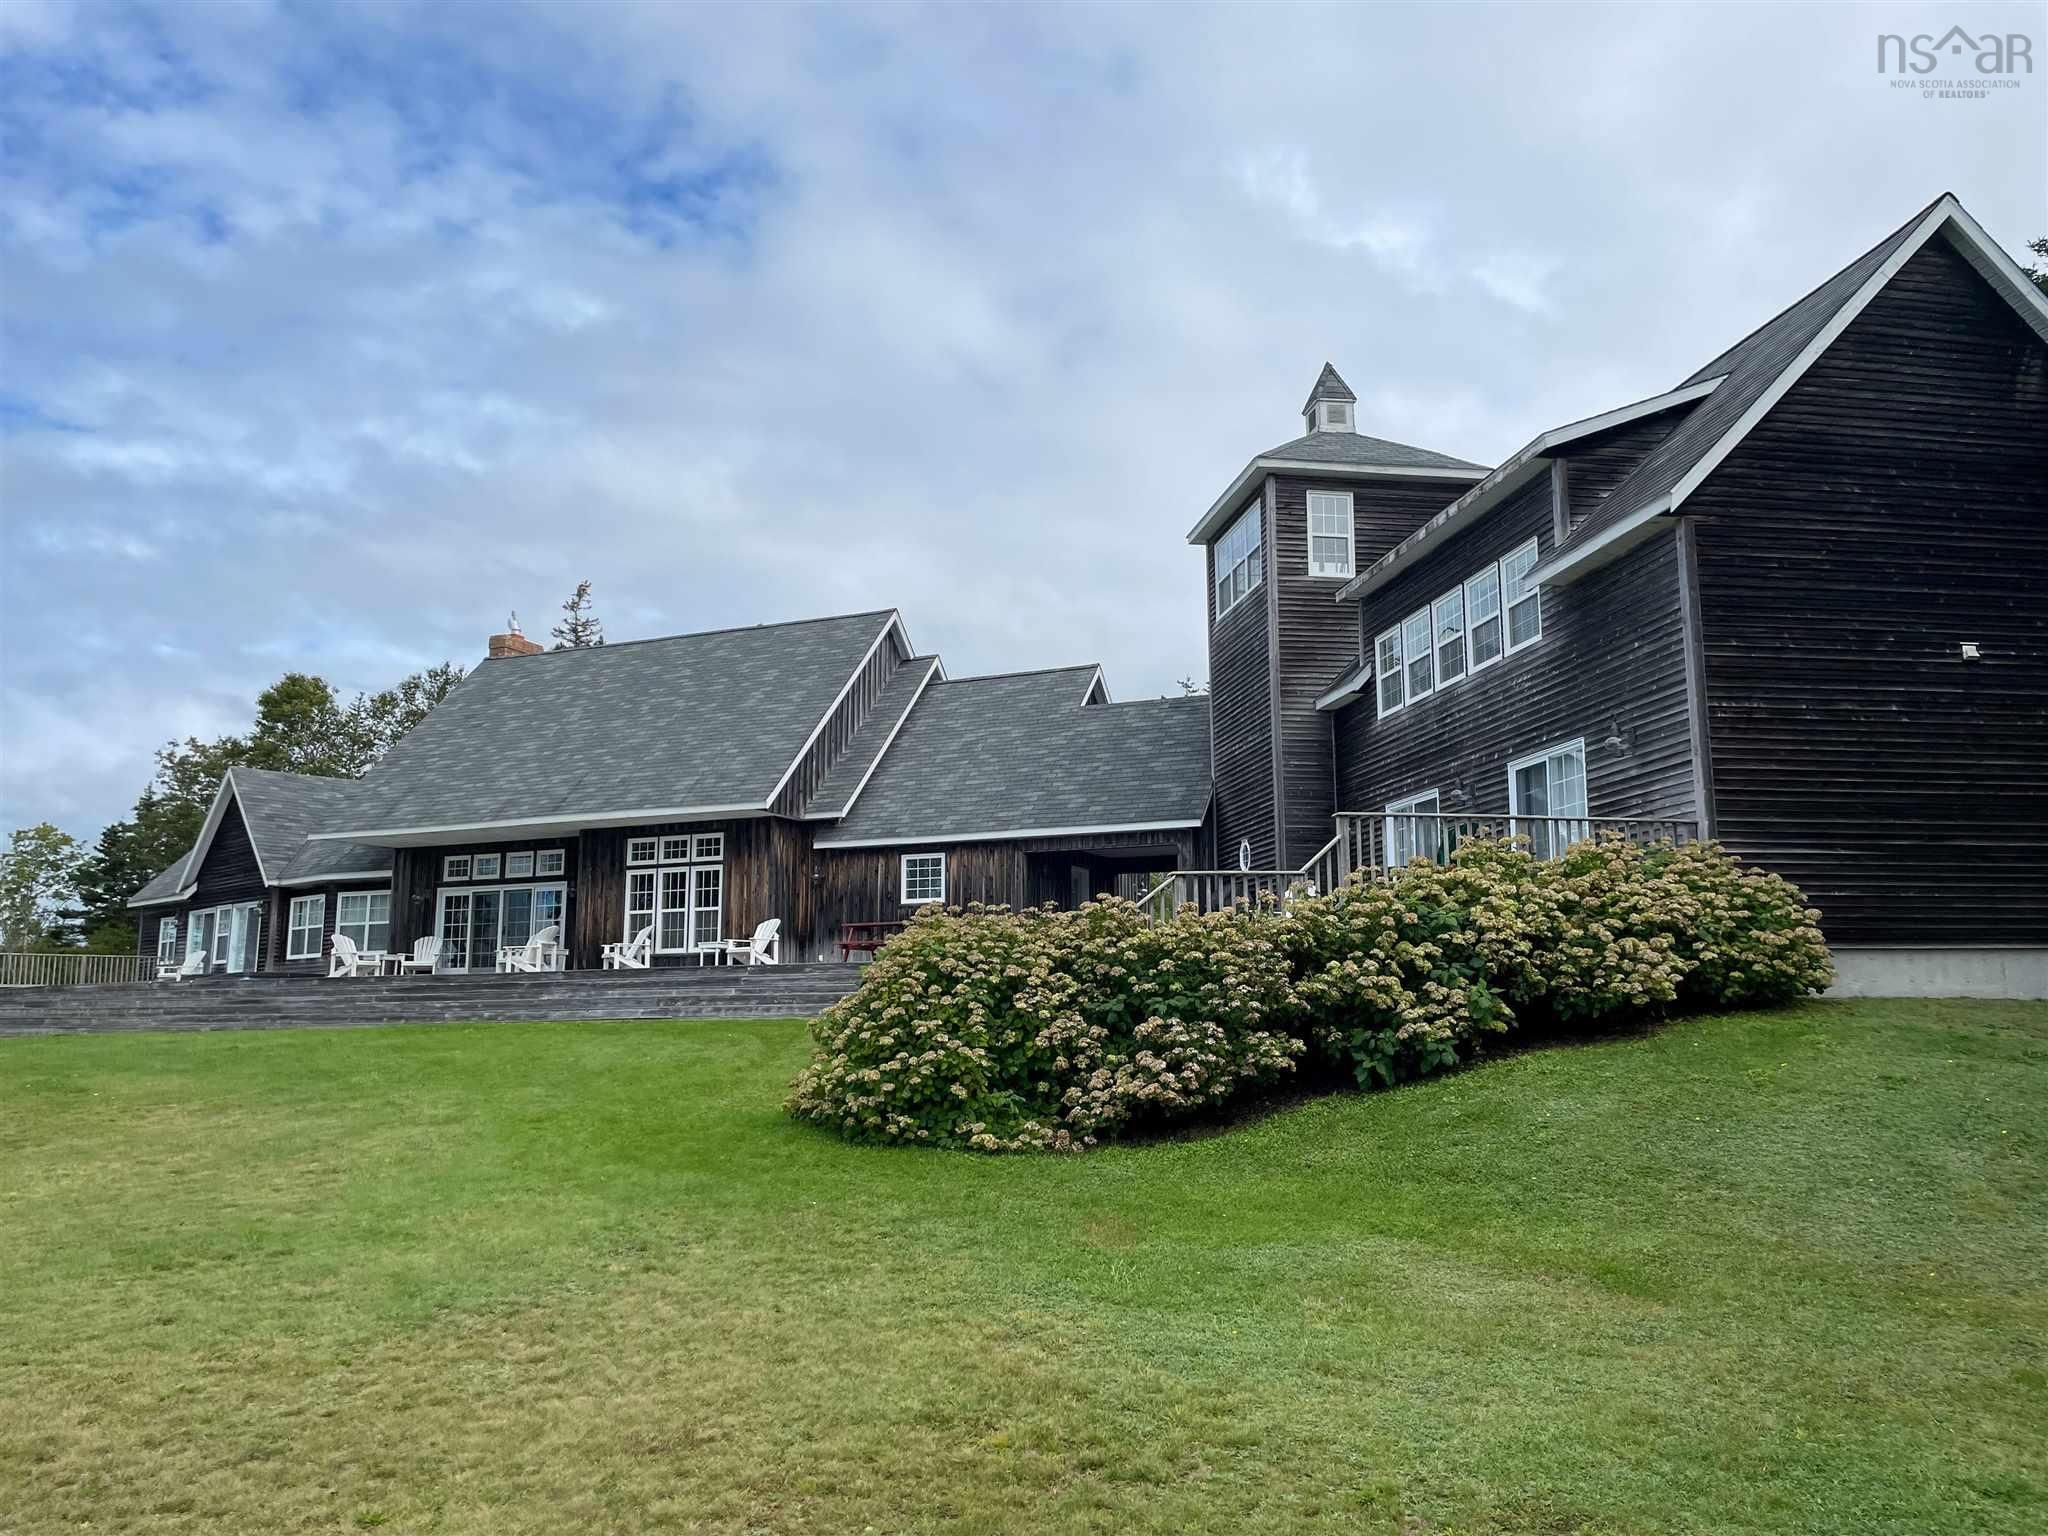 Main Photo: 20 Williams Road in East Green Harbour: 407-Shelburne County Residential for sale (South Shore)  : MLS®# 202123409